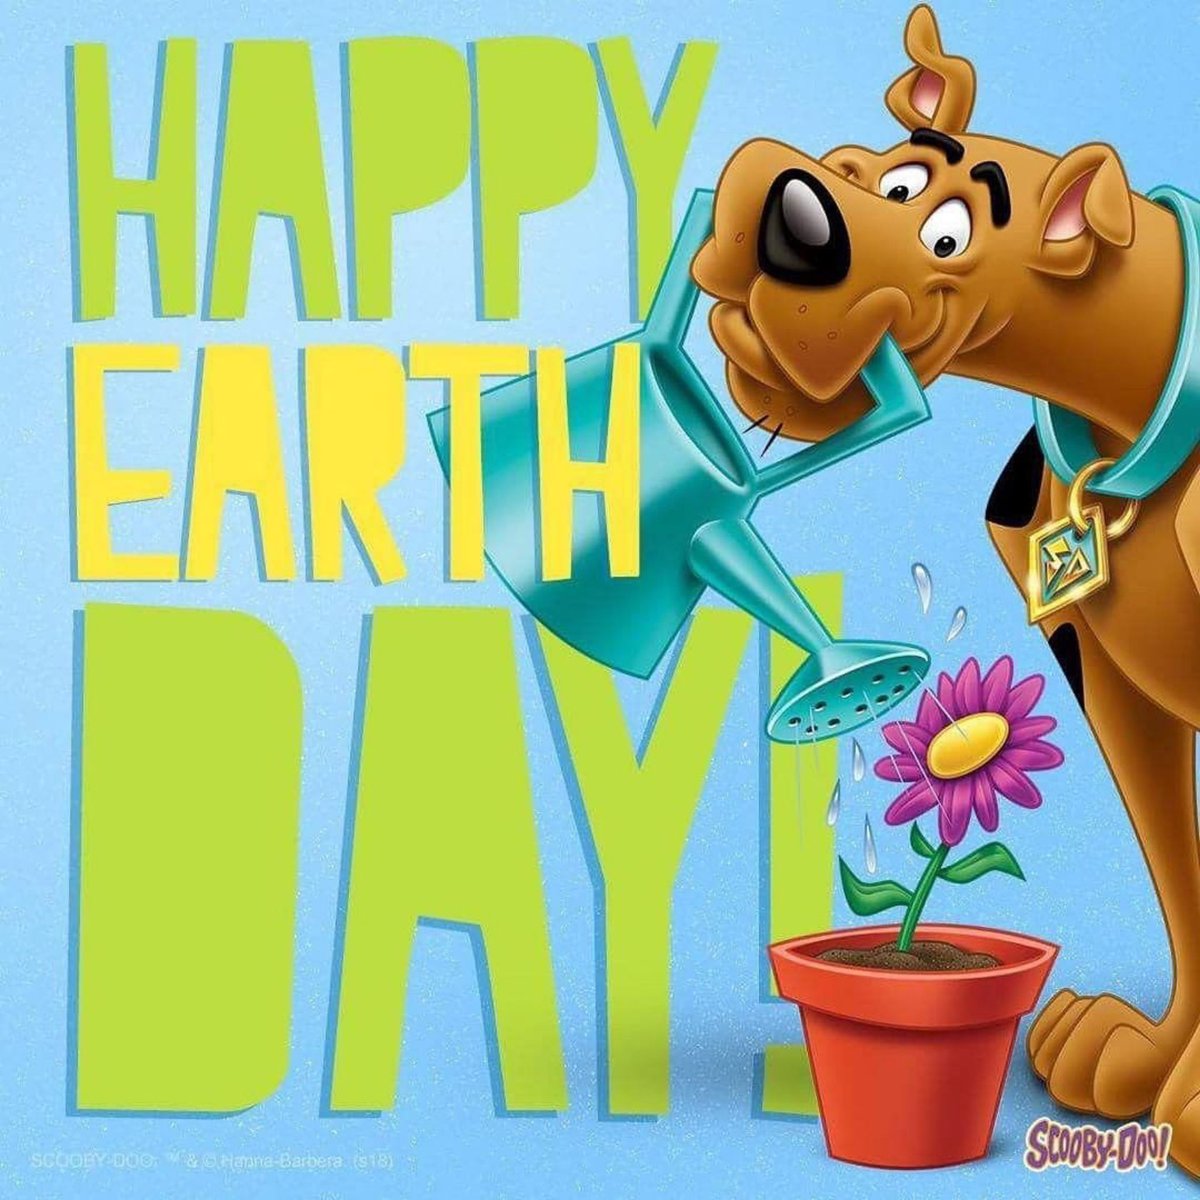 Happy Earth Day from Scooby-Doo and the crew! 🌎 #ScoobyDoo #EarthDay #Earth